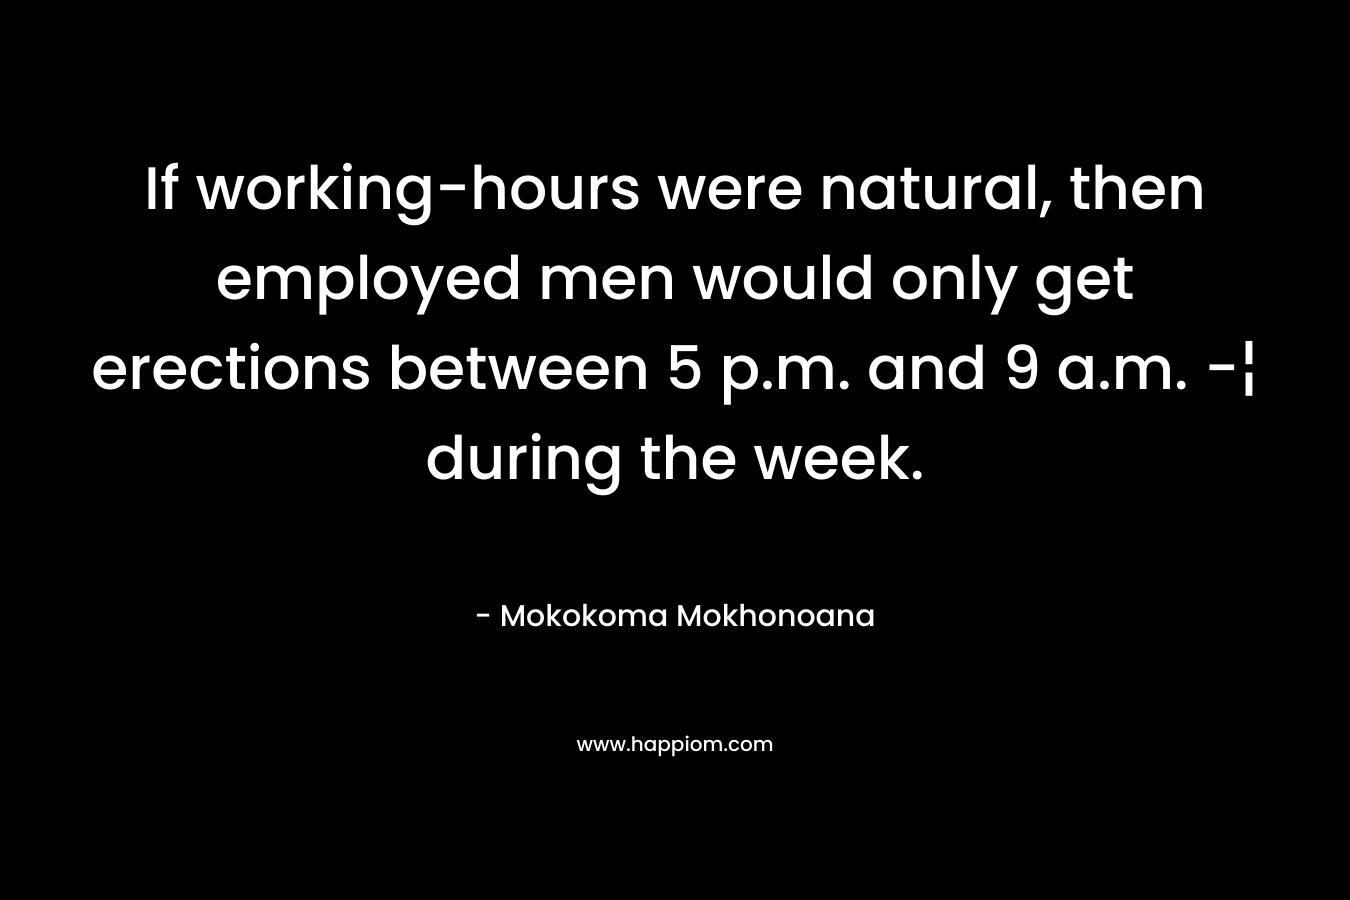 If working-hours were natural, then employed men would only get erections between 5 p.m. and 9 a.m. -¦ during the week. – Mokokoma Mokhonoana